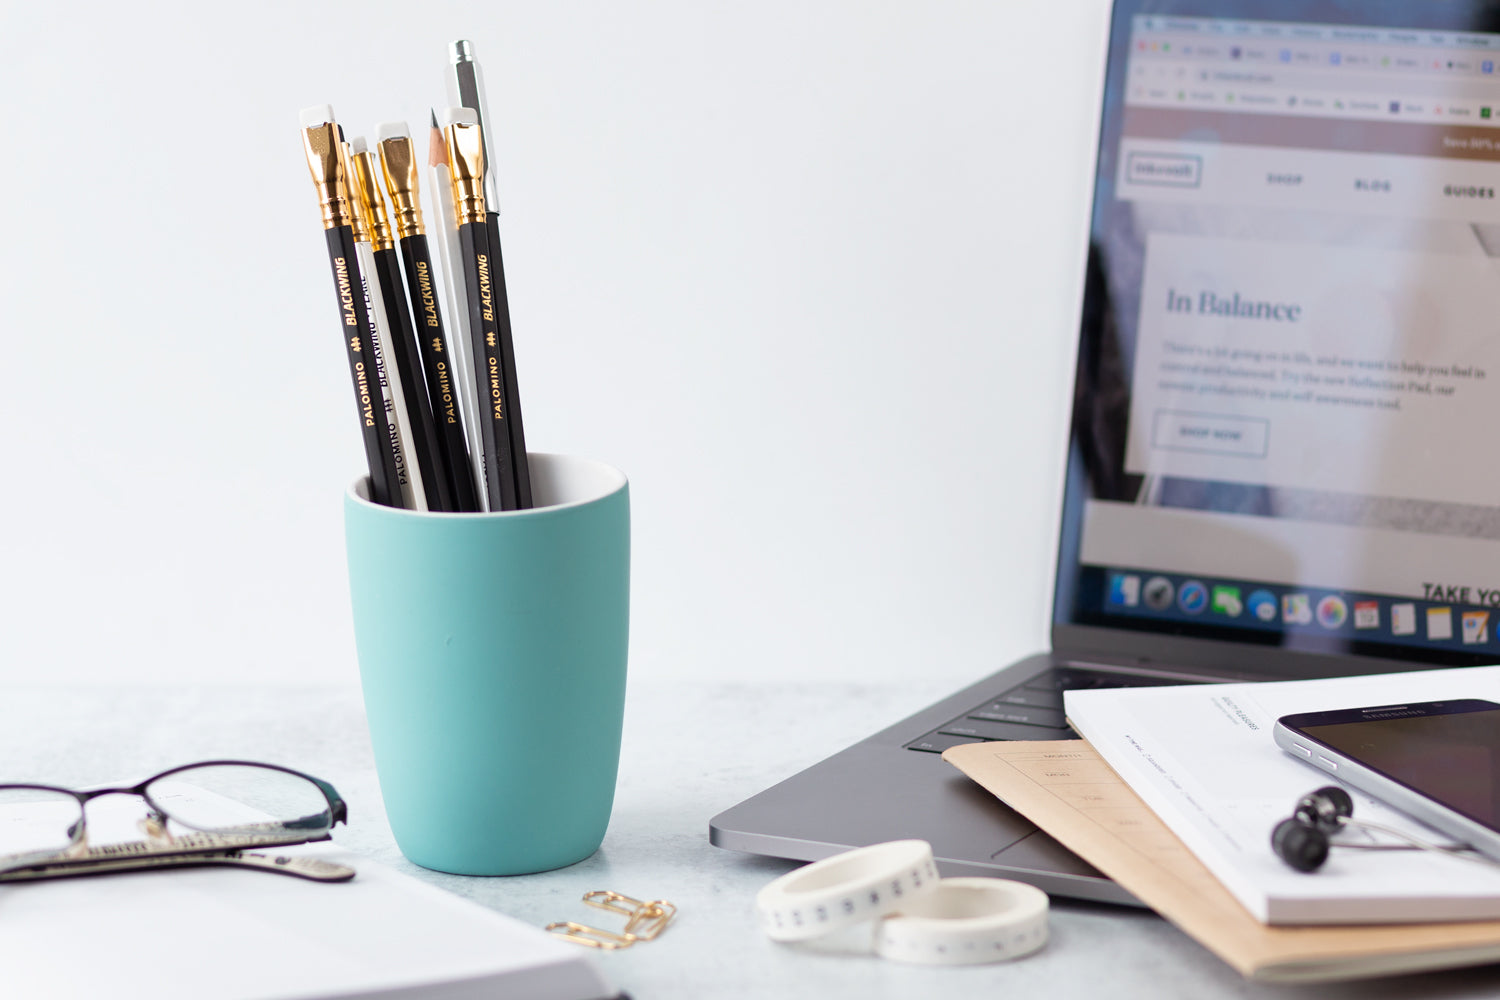 NEW - Desktop Organizers for Your Cluttered Media Lifestyle